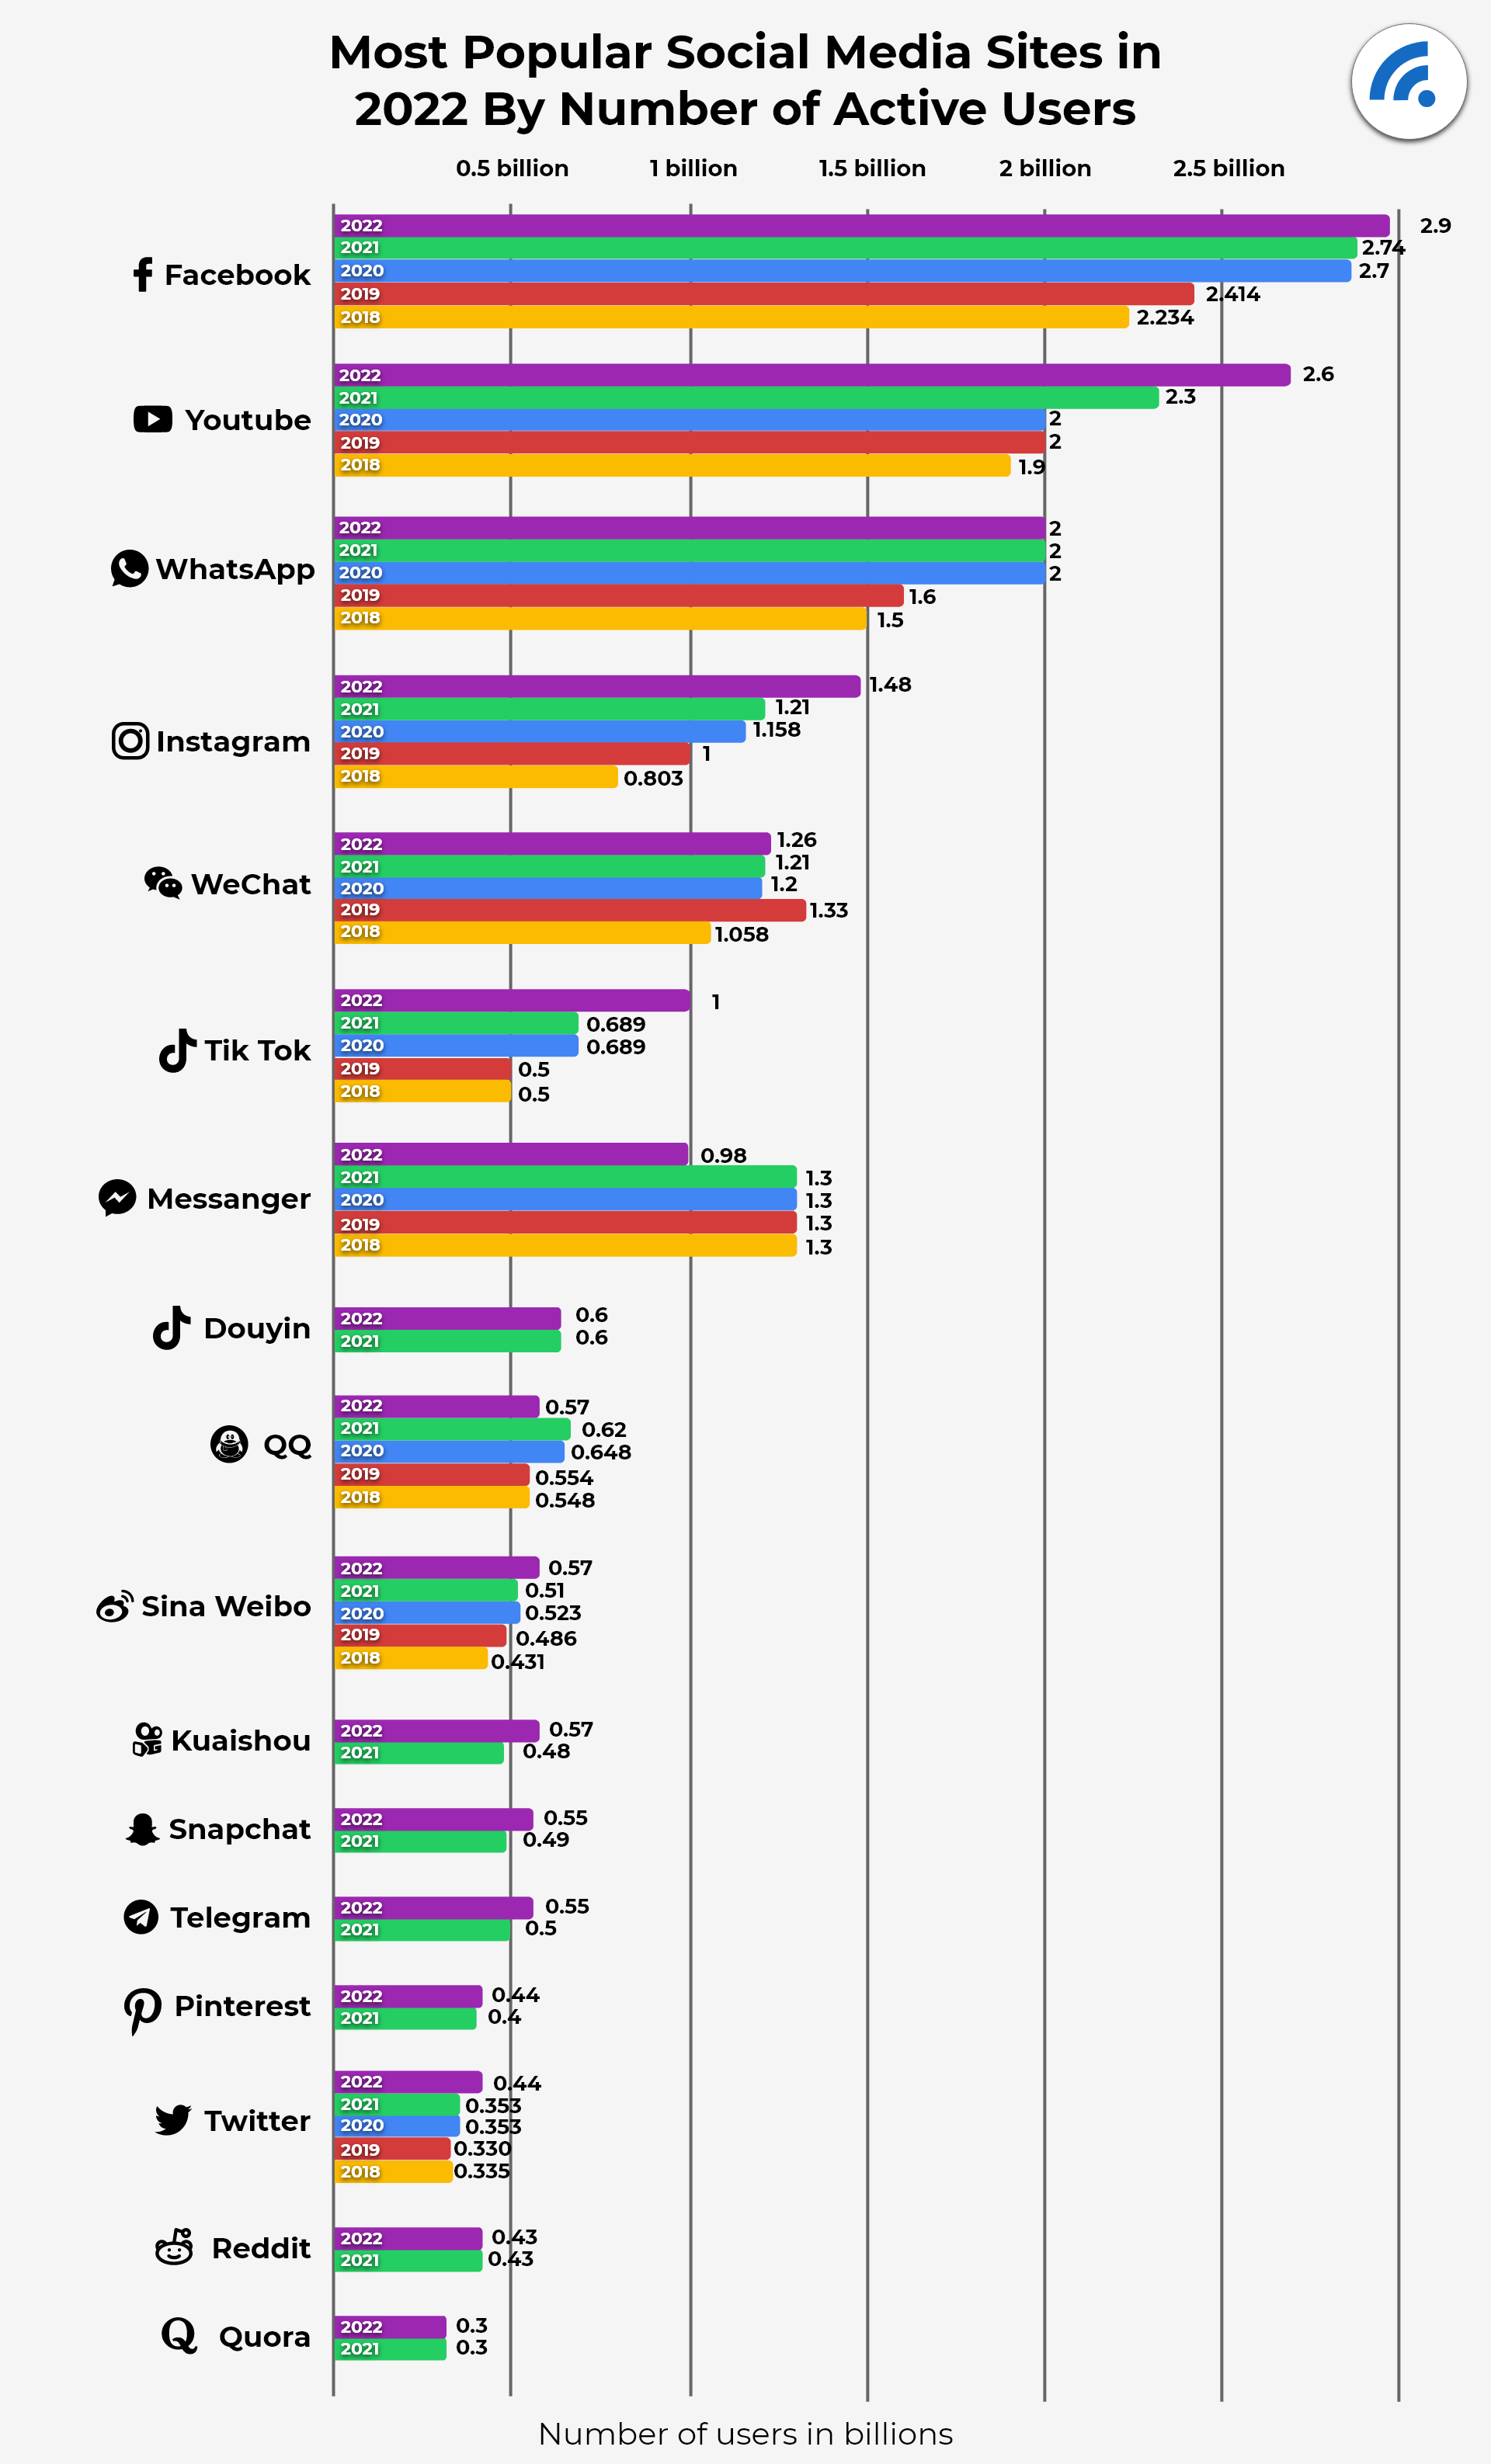 The Most Popular Social Networking Sites in 2022 BroadbandSearch